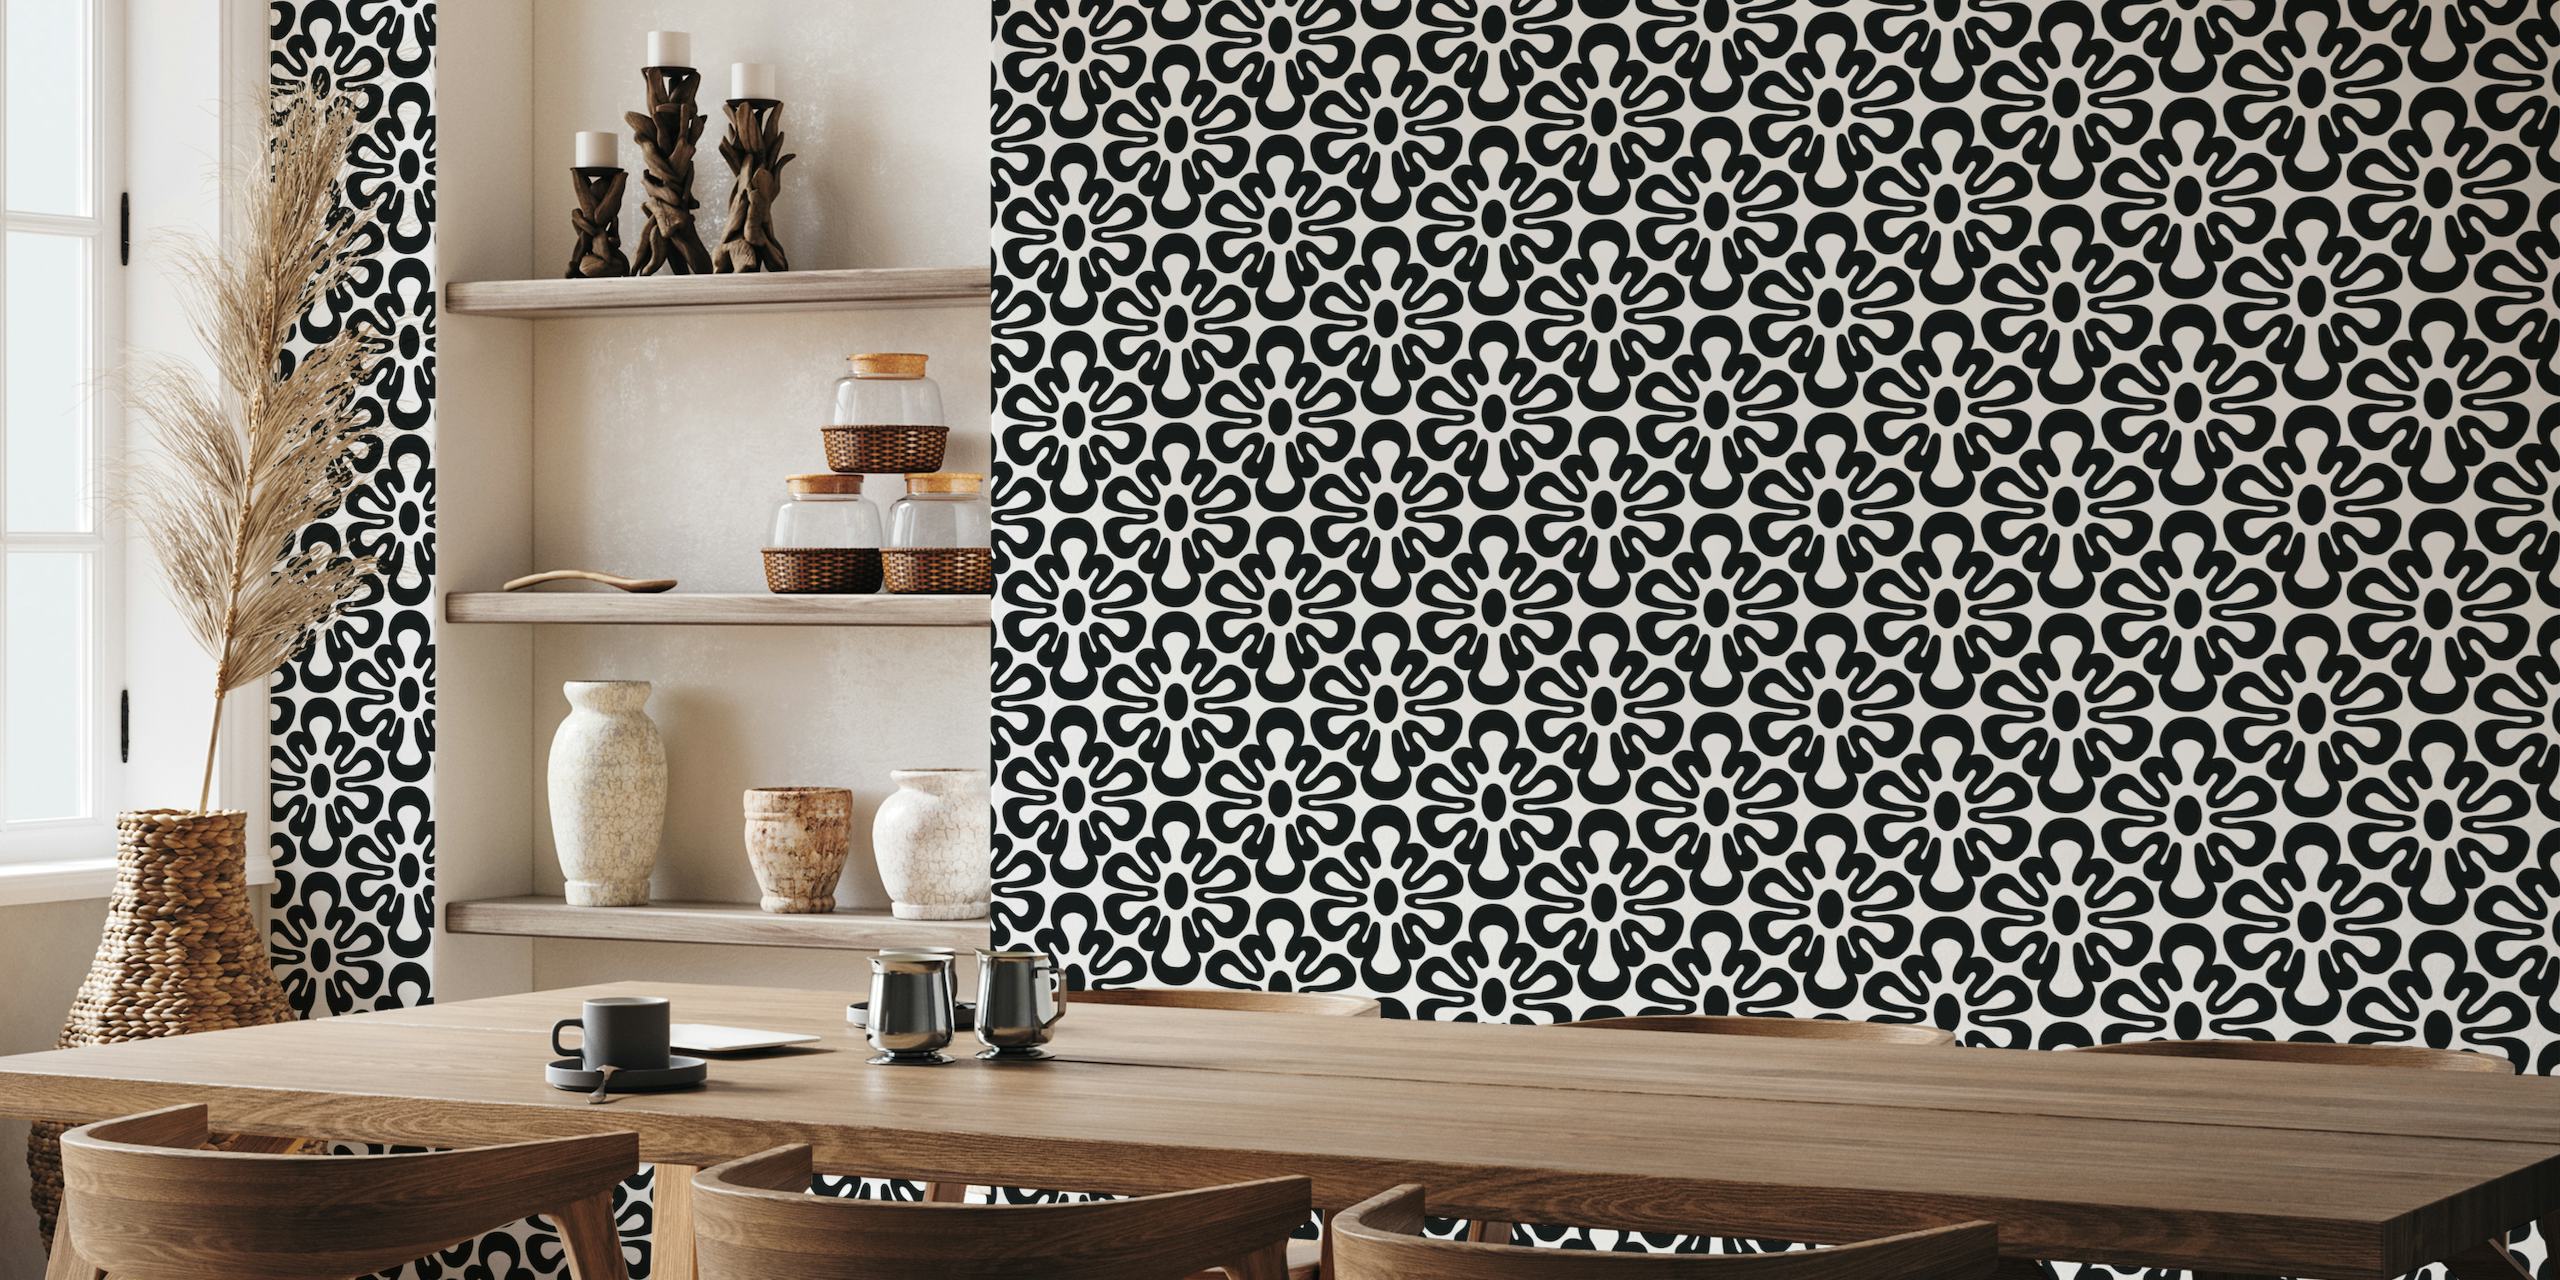 2625 D - abstract shapes pattern, black and white papiers peint